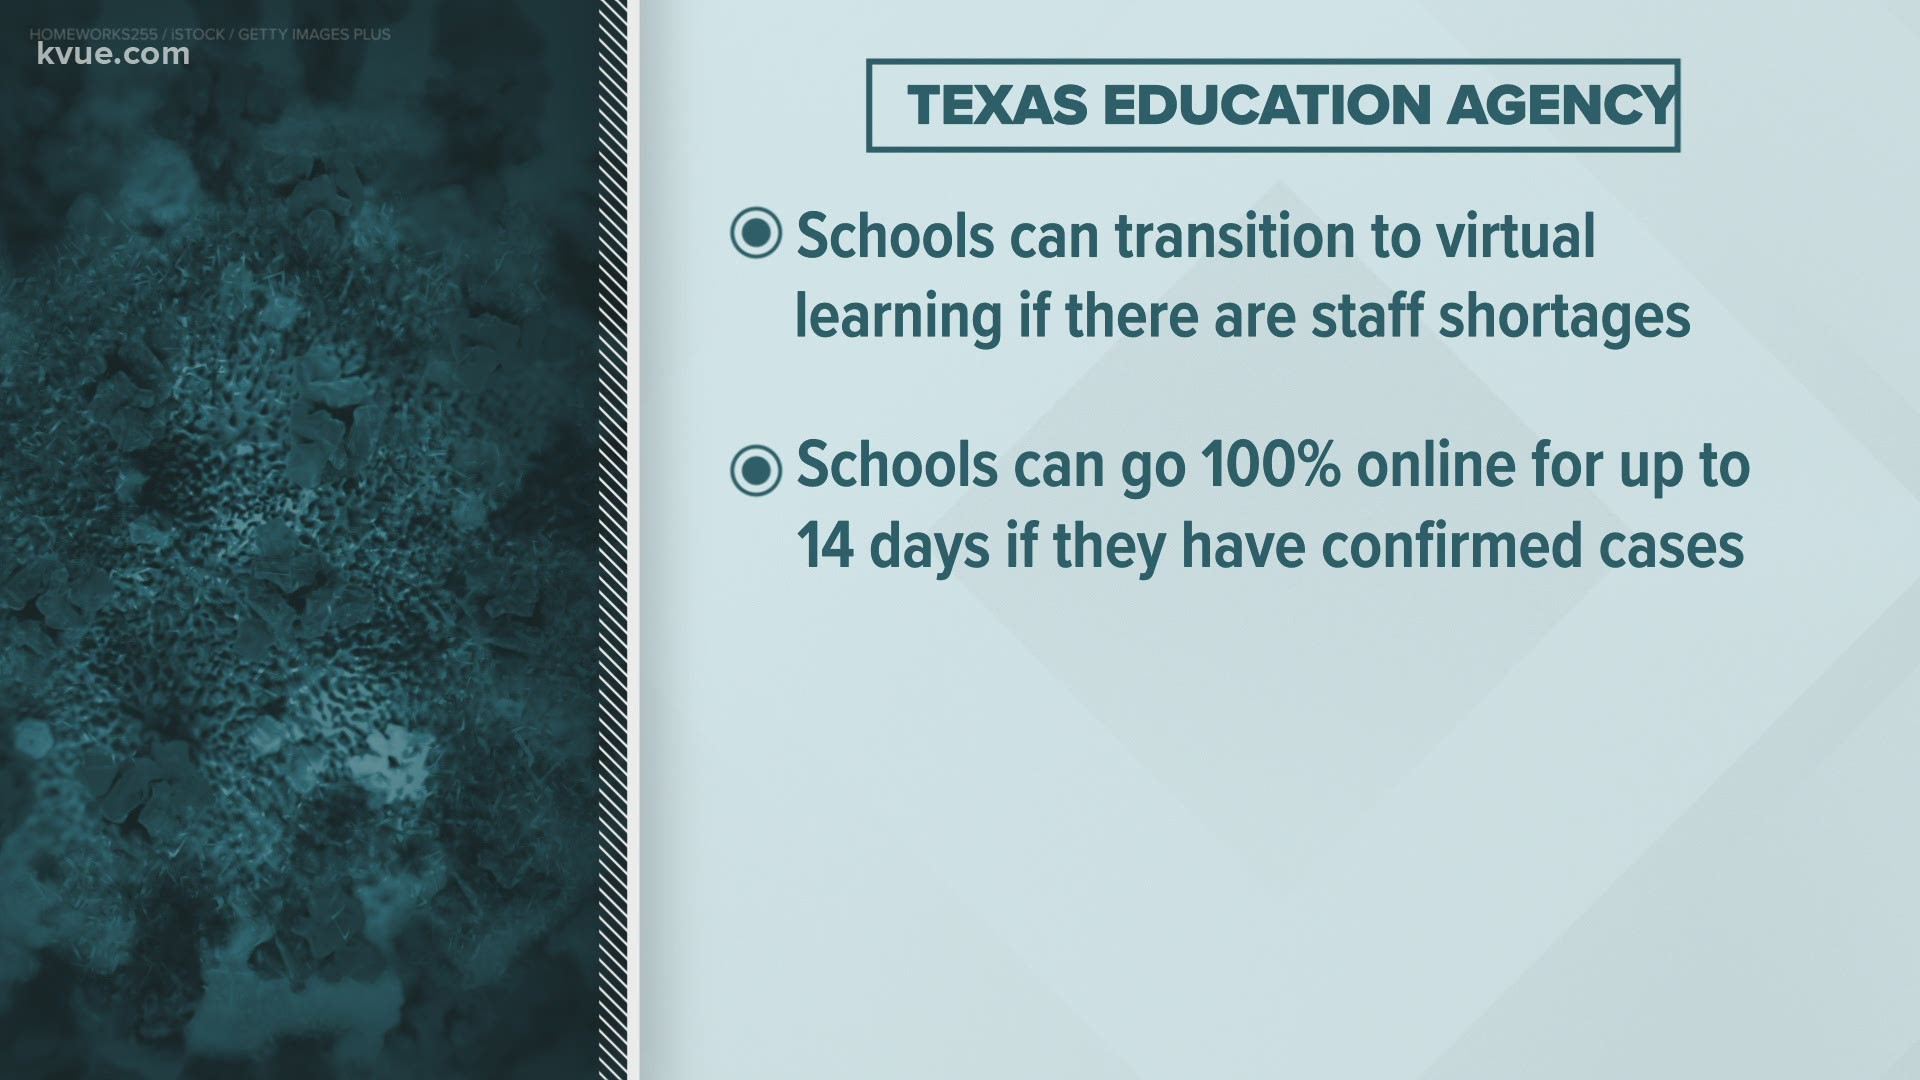 The Texas Education Agency is changing some of its guidelines for schools.